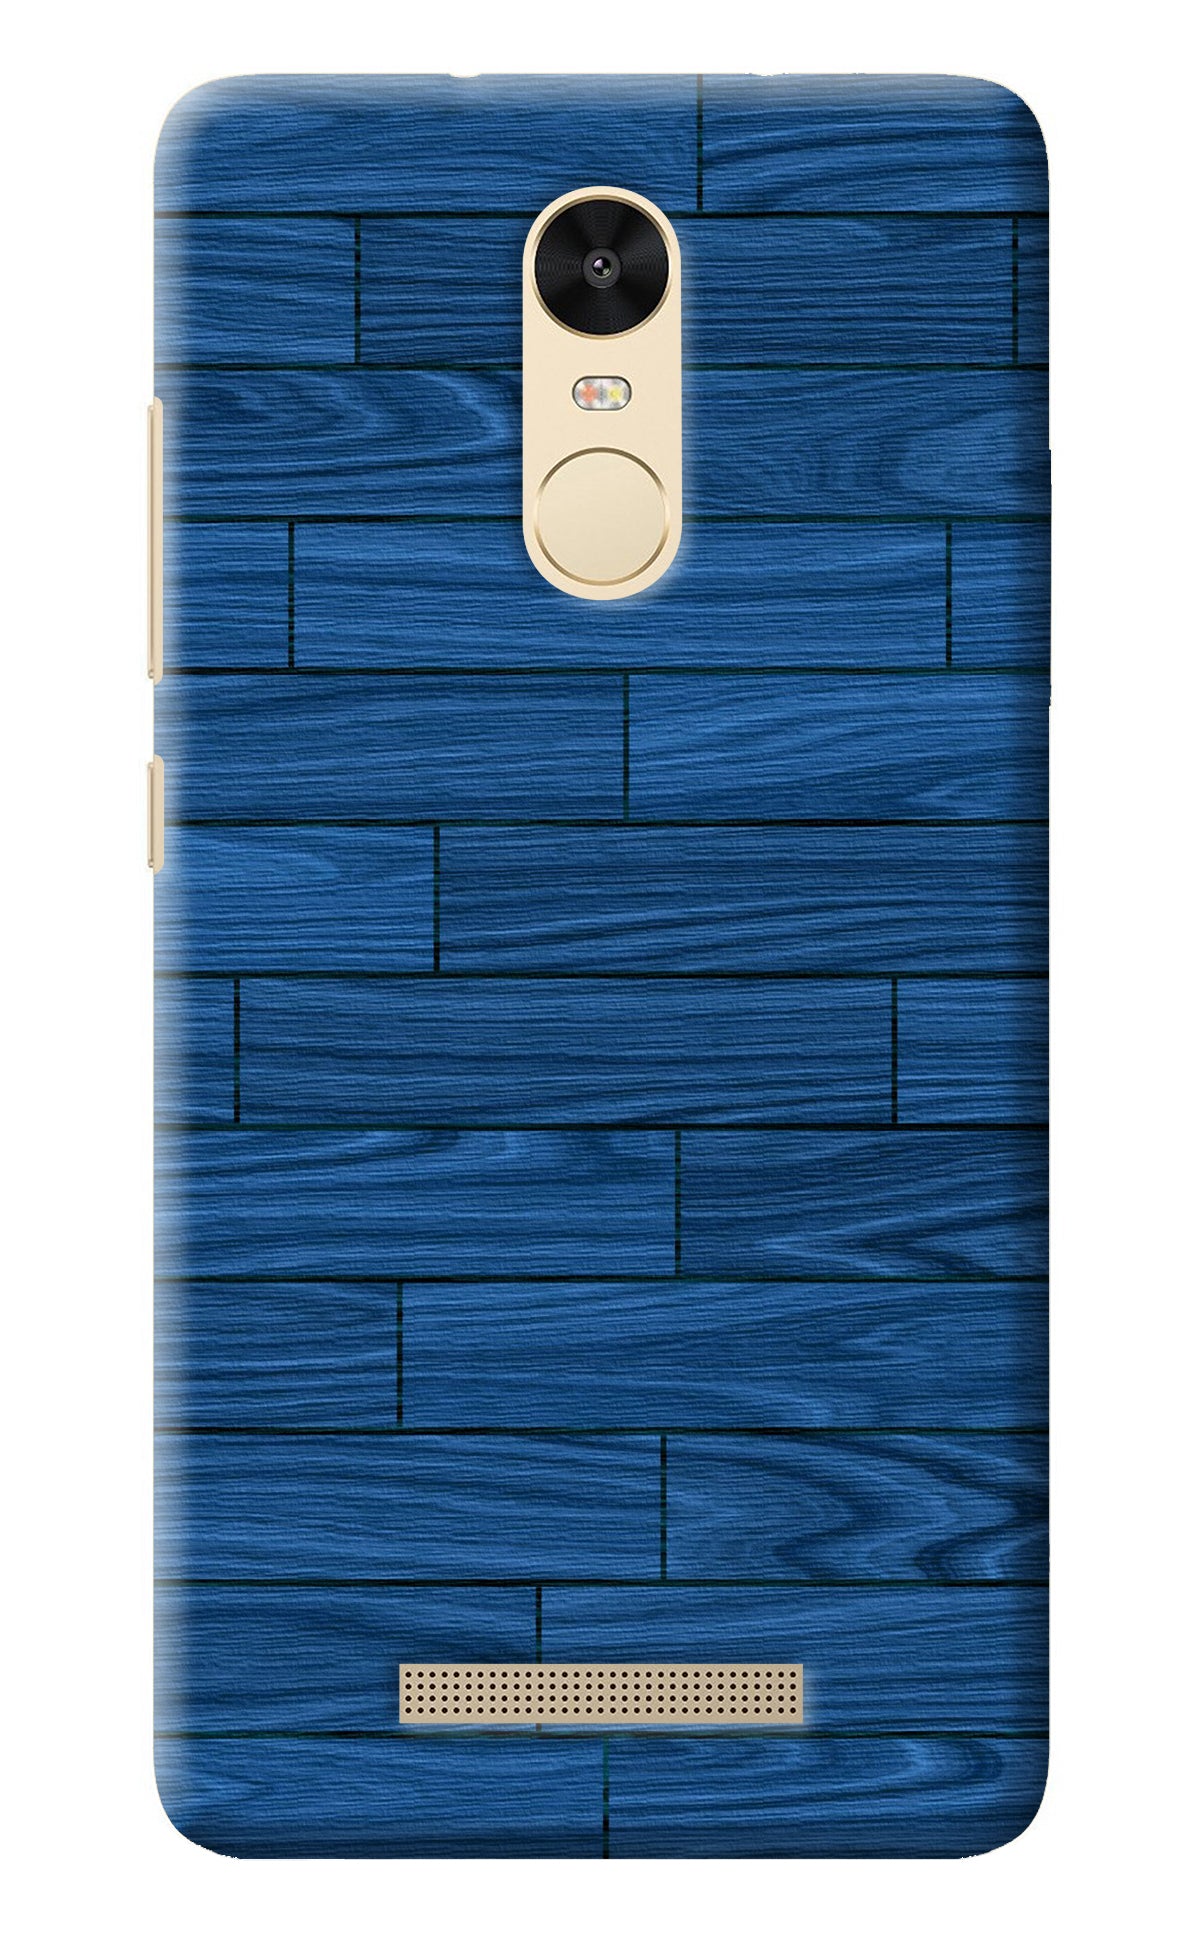 Wooden Texture Redmi Note 3 Back Cover